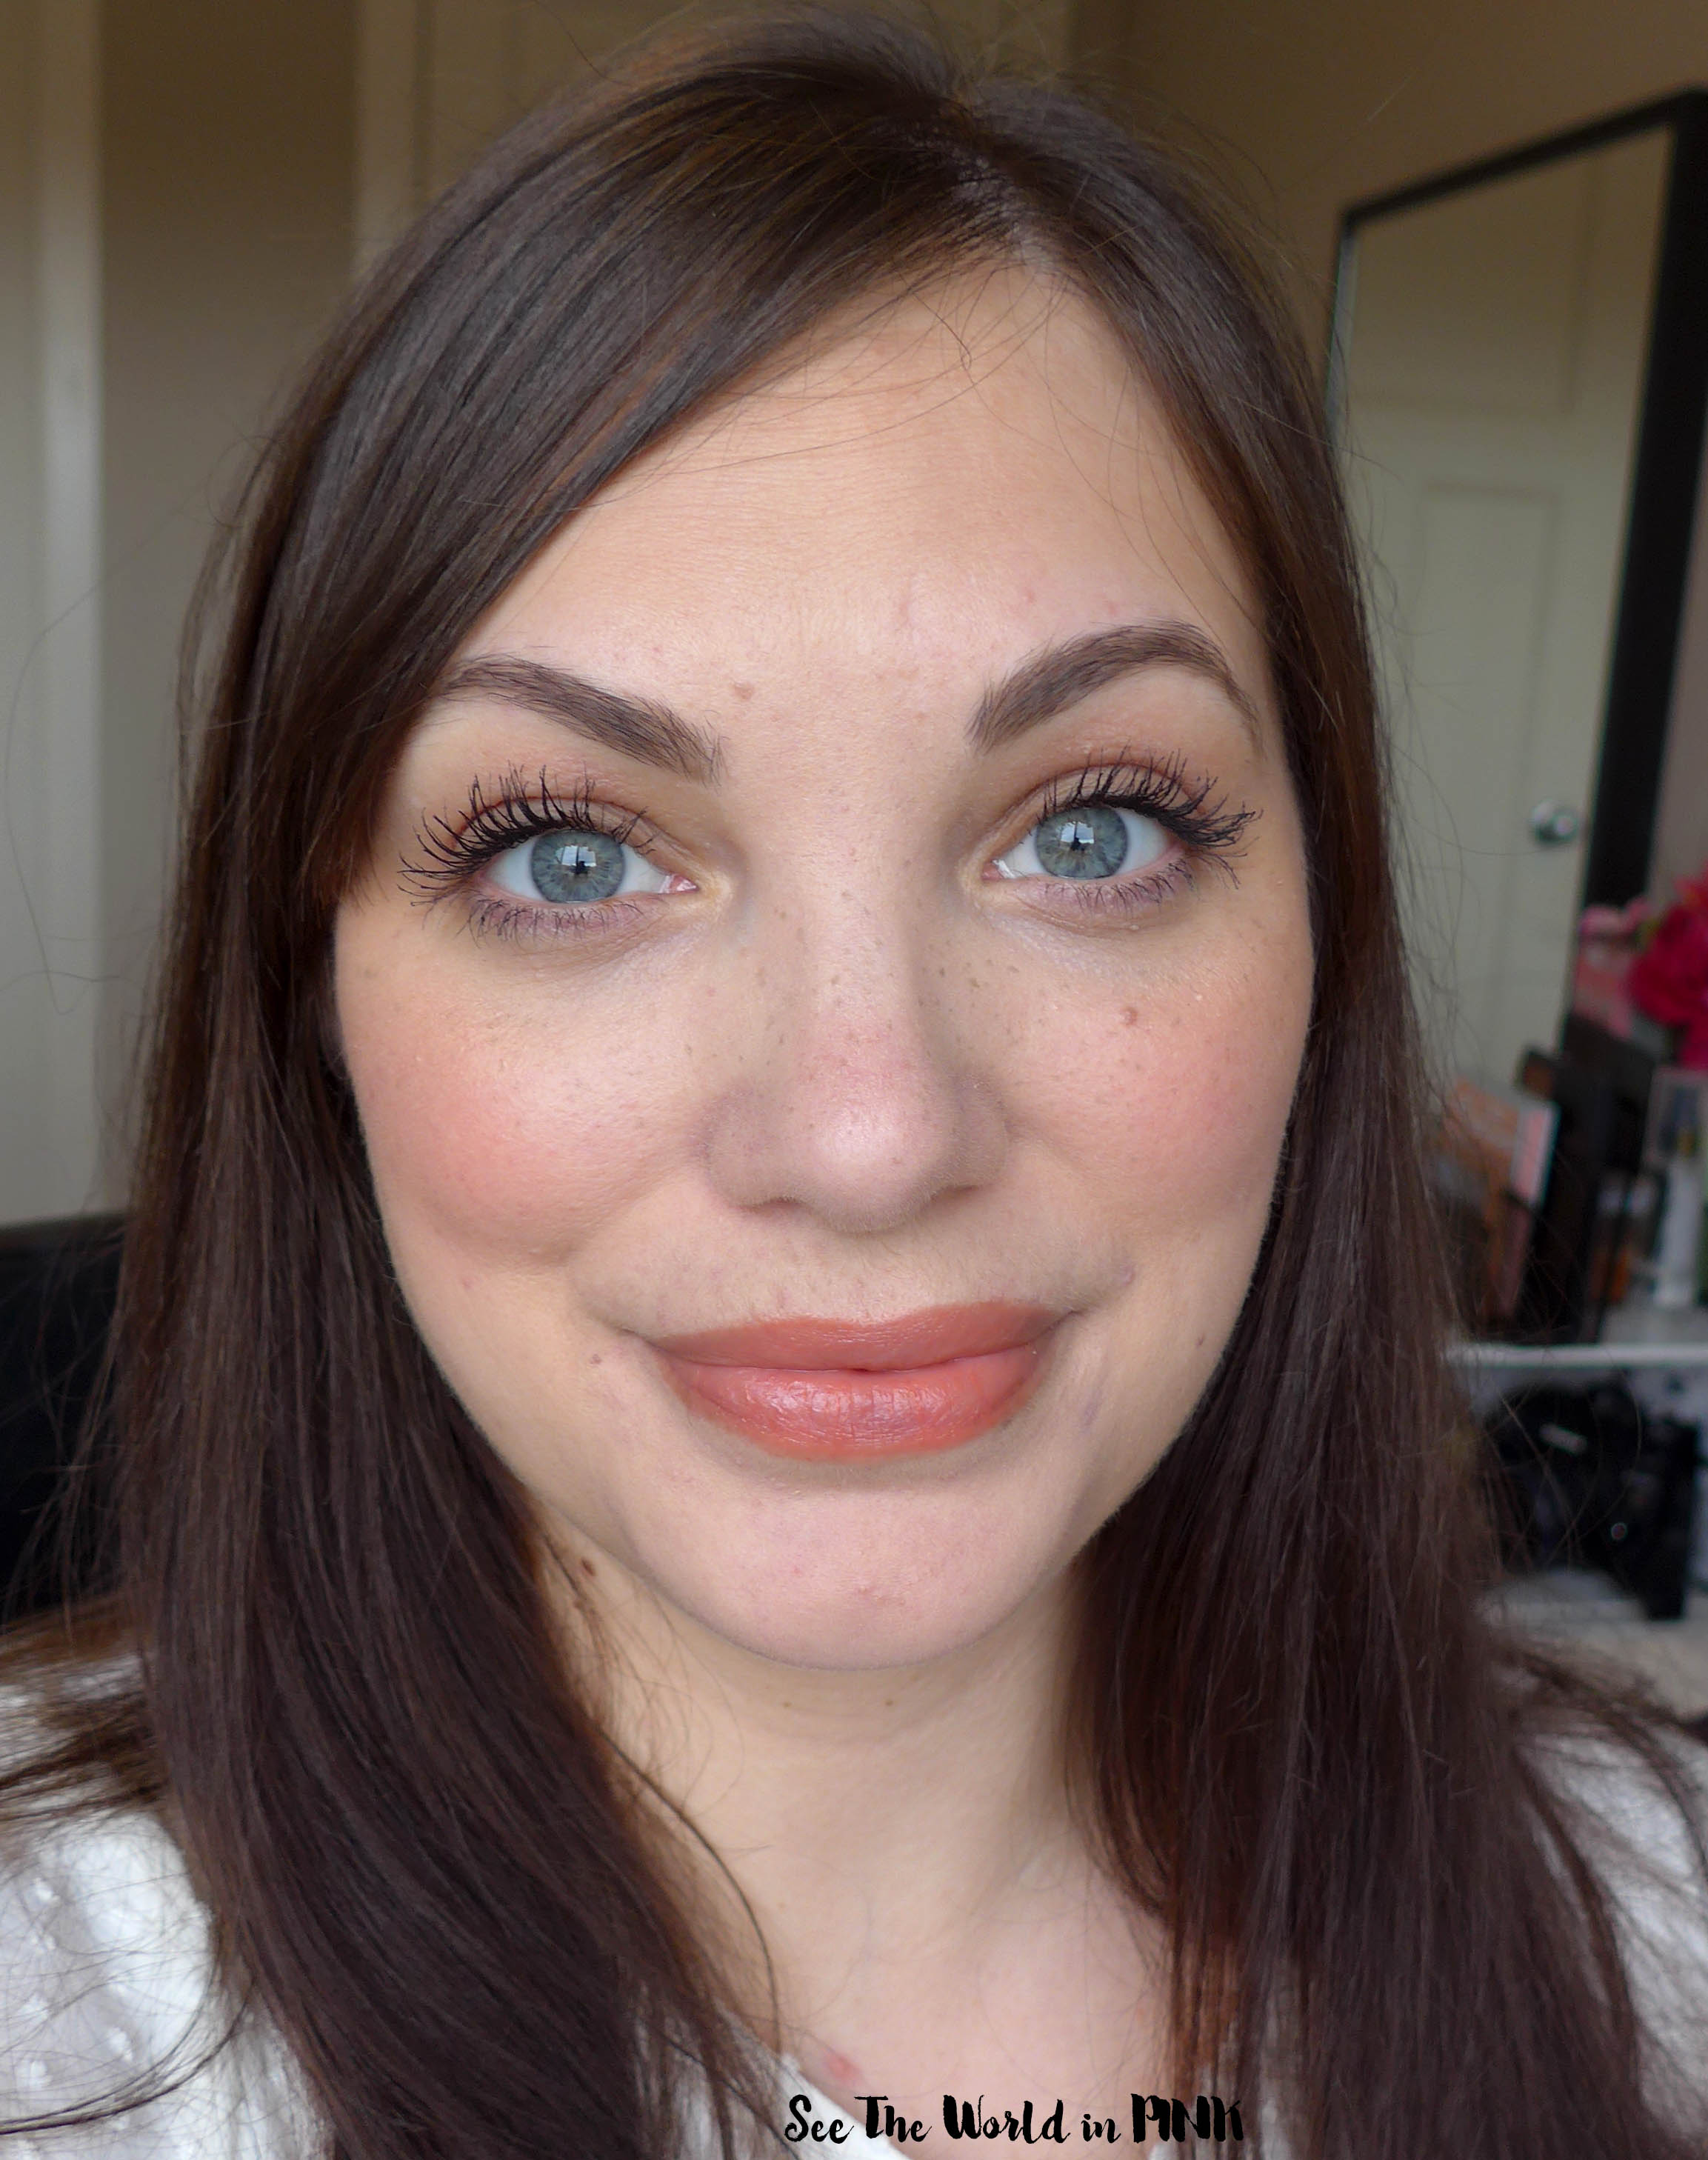 Shop My Stash Makeup Look - April 2022 ~ Fresh, Fun, Freckled Spring Look & Trying the Eyebrow Pencil & Blush Lipstick Trend